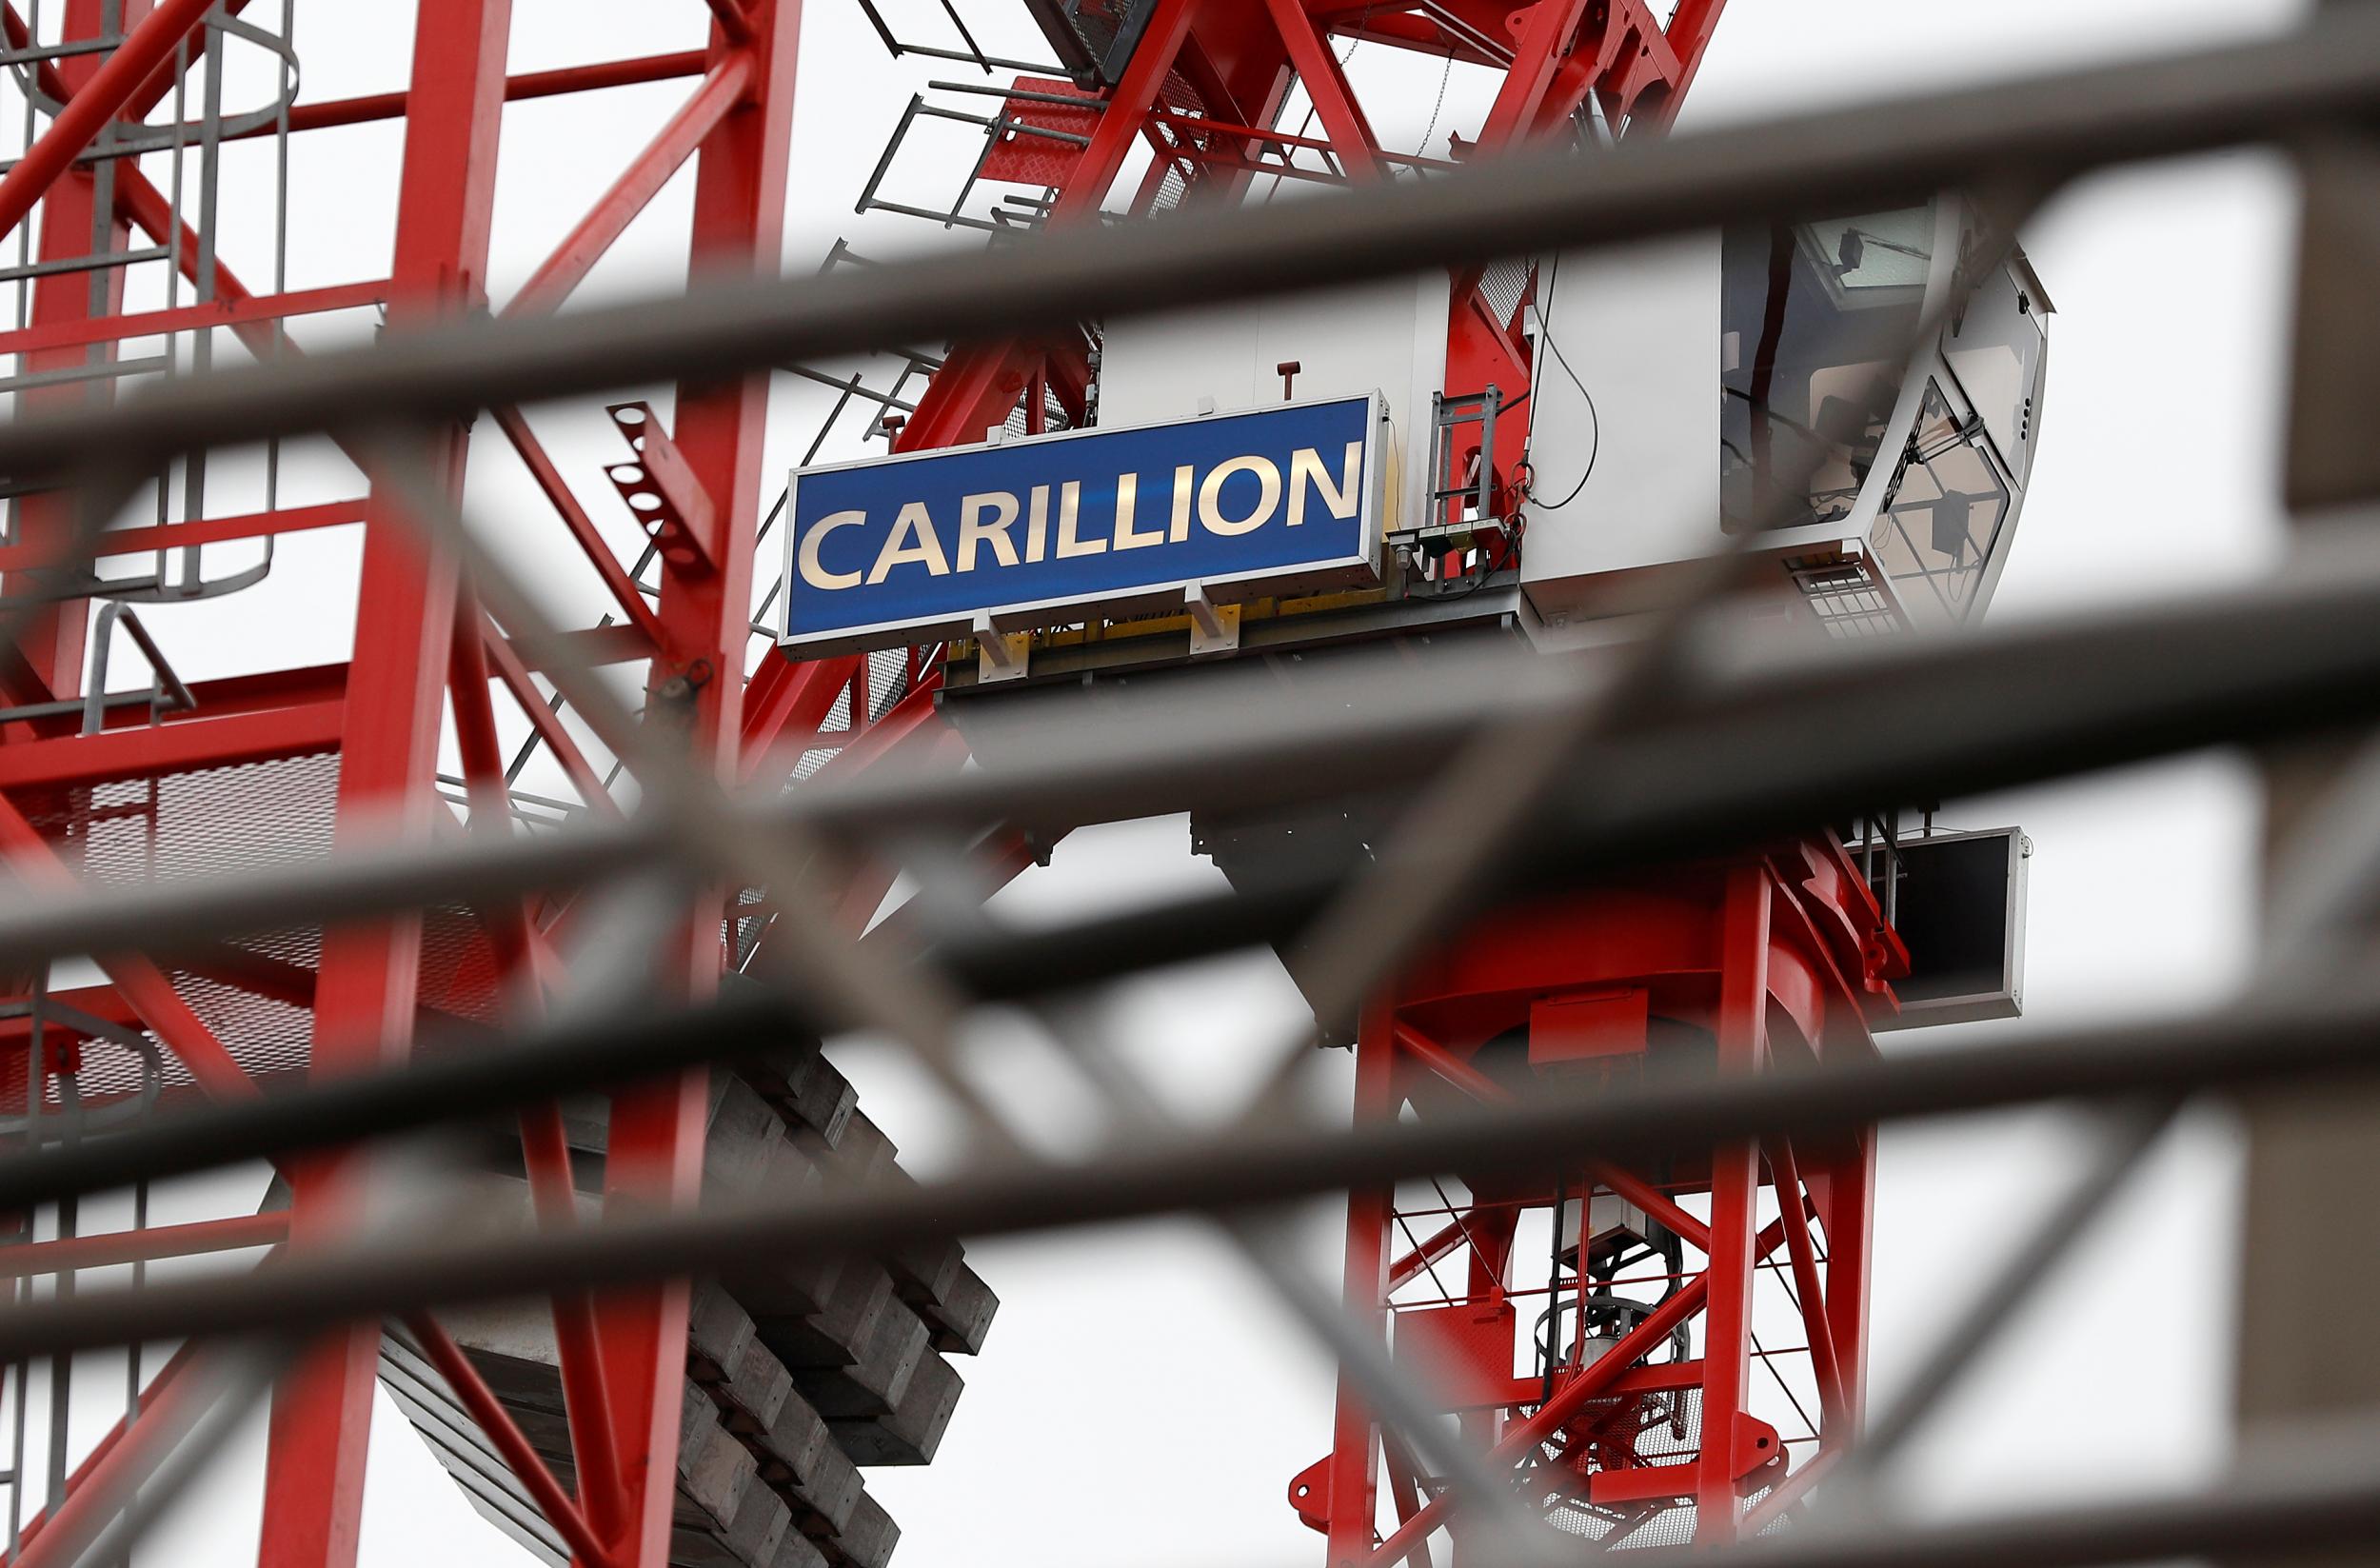 Carillion was the UK's second-largest construction company at the time of its collapse in 2018